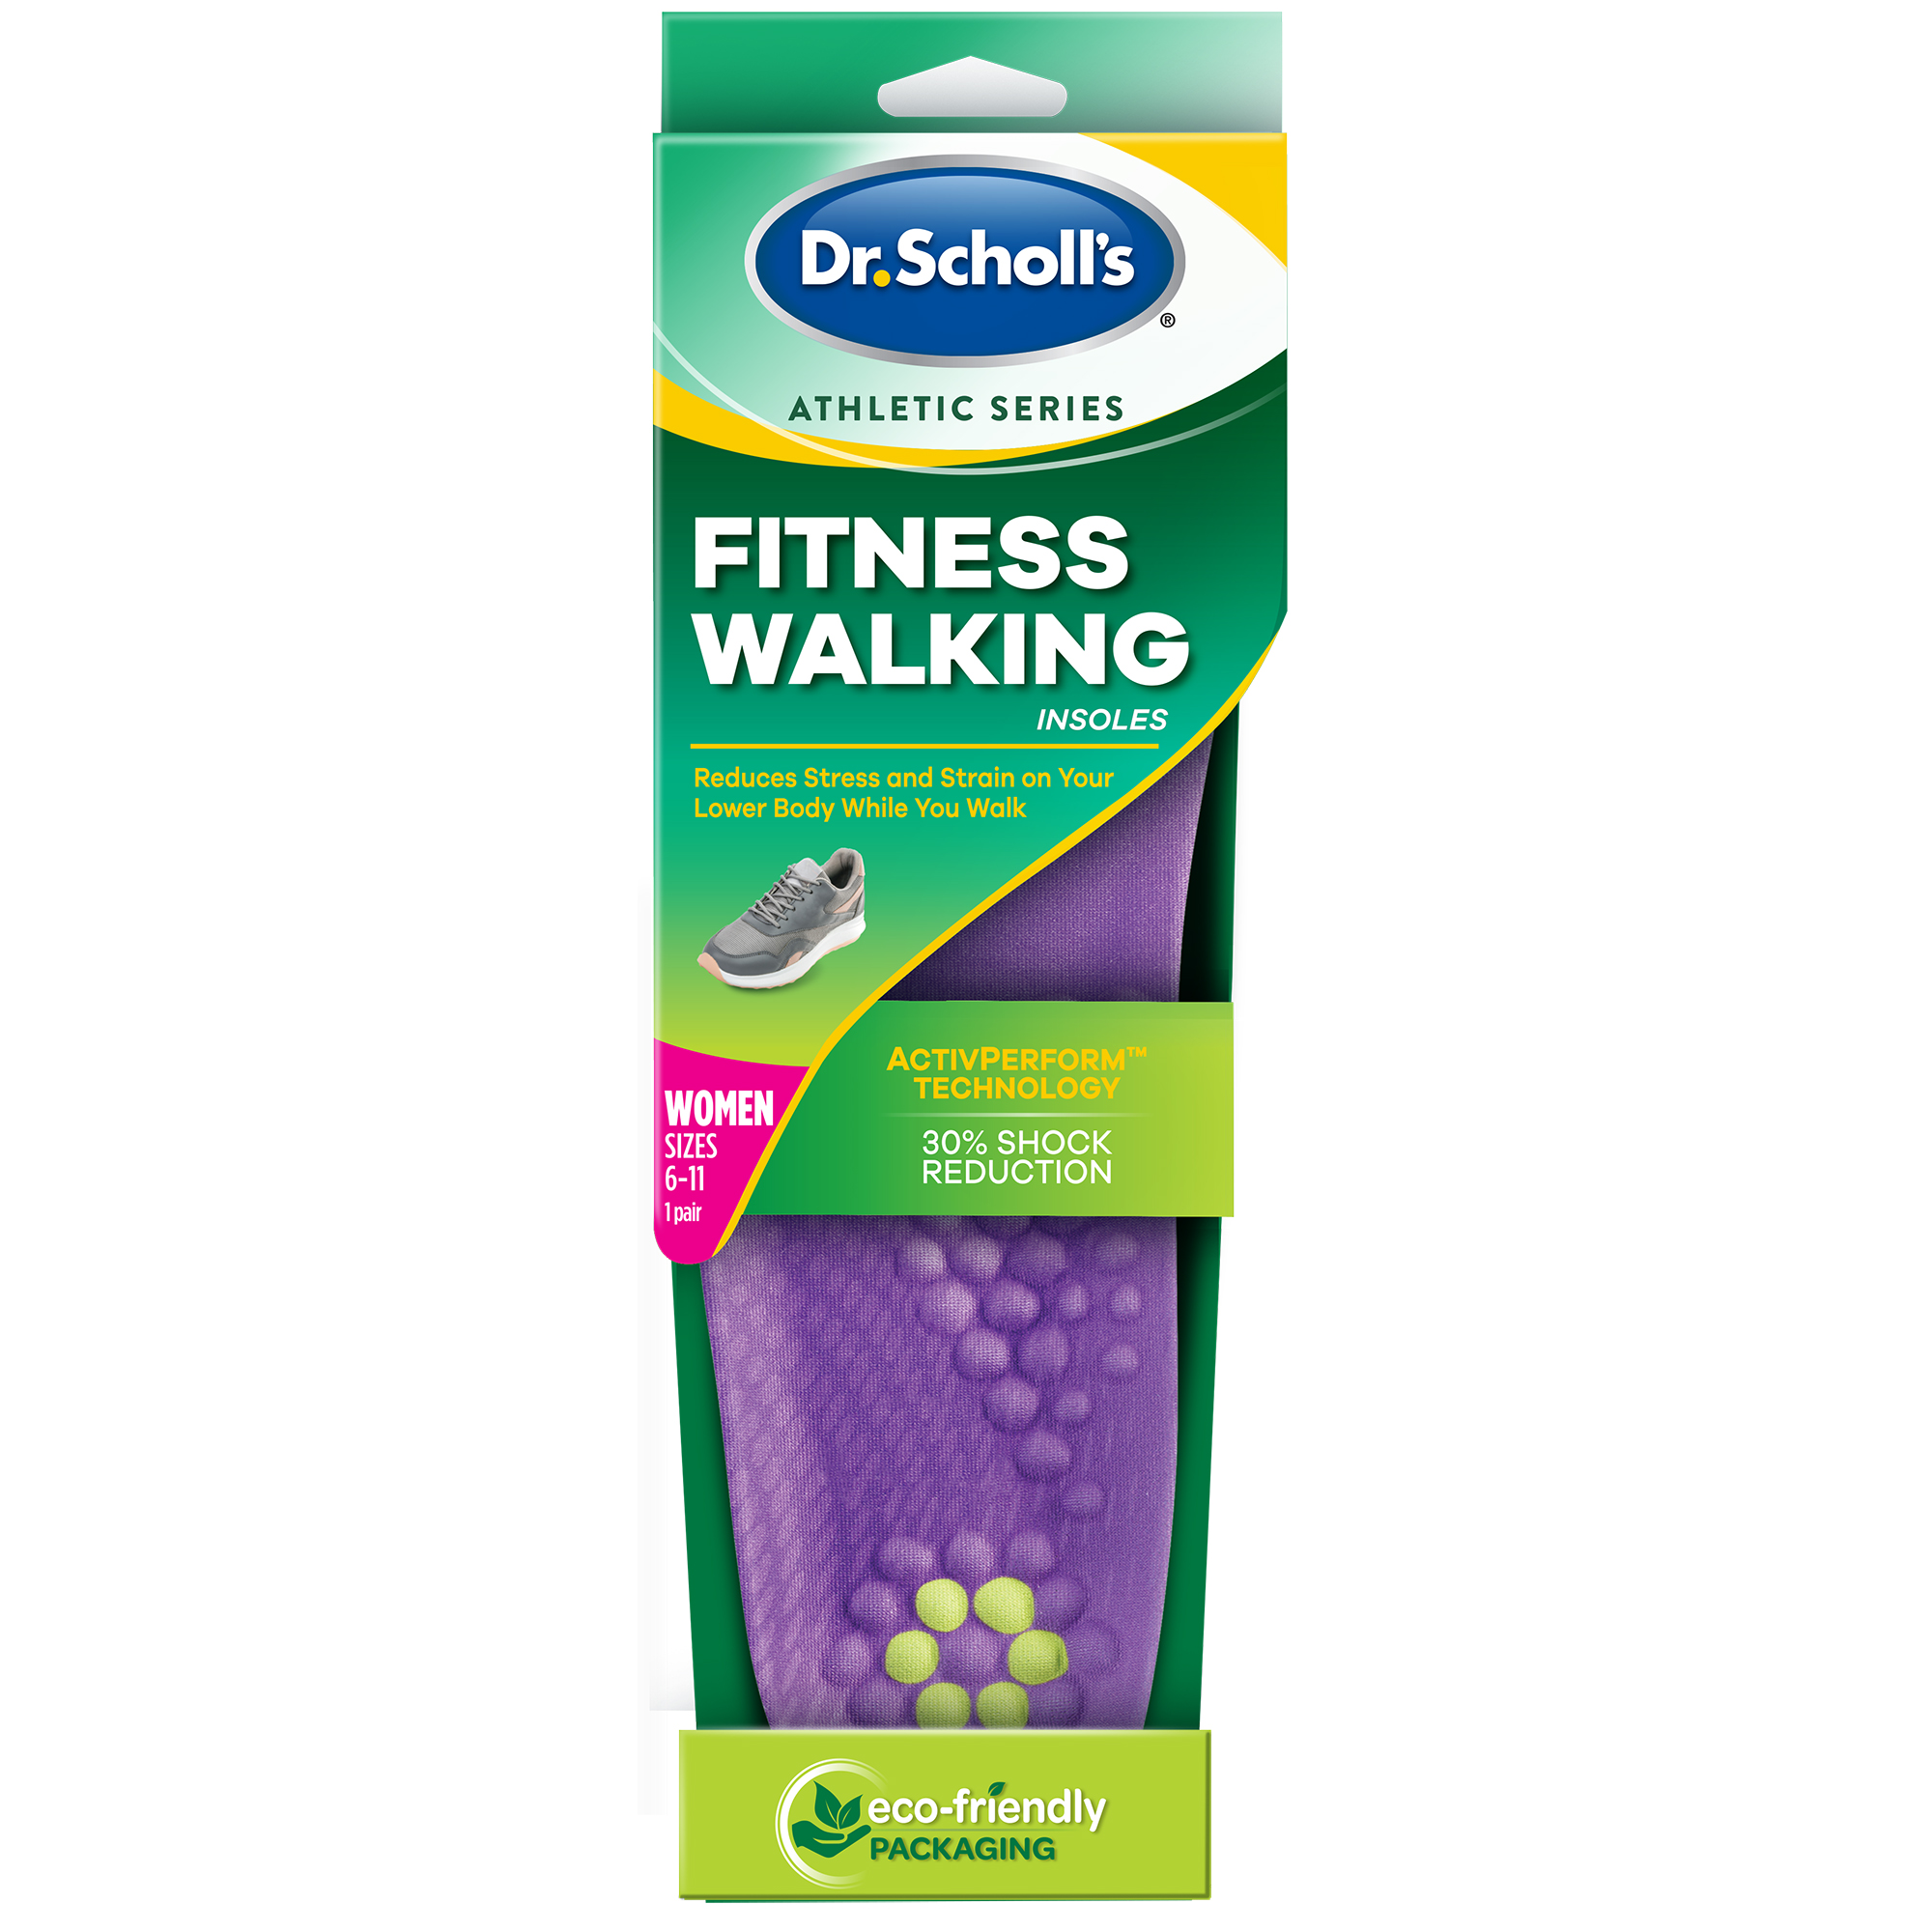 Dr. Scholl's Fitness Walking Insoles for Men (6-10) Inserts to Reduce Strain on your Lower Body - image 1 of 4